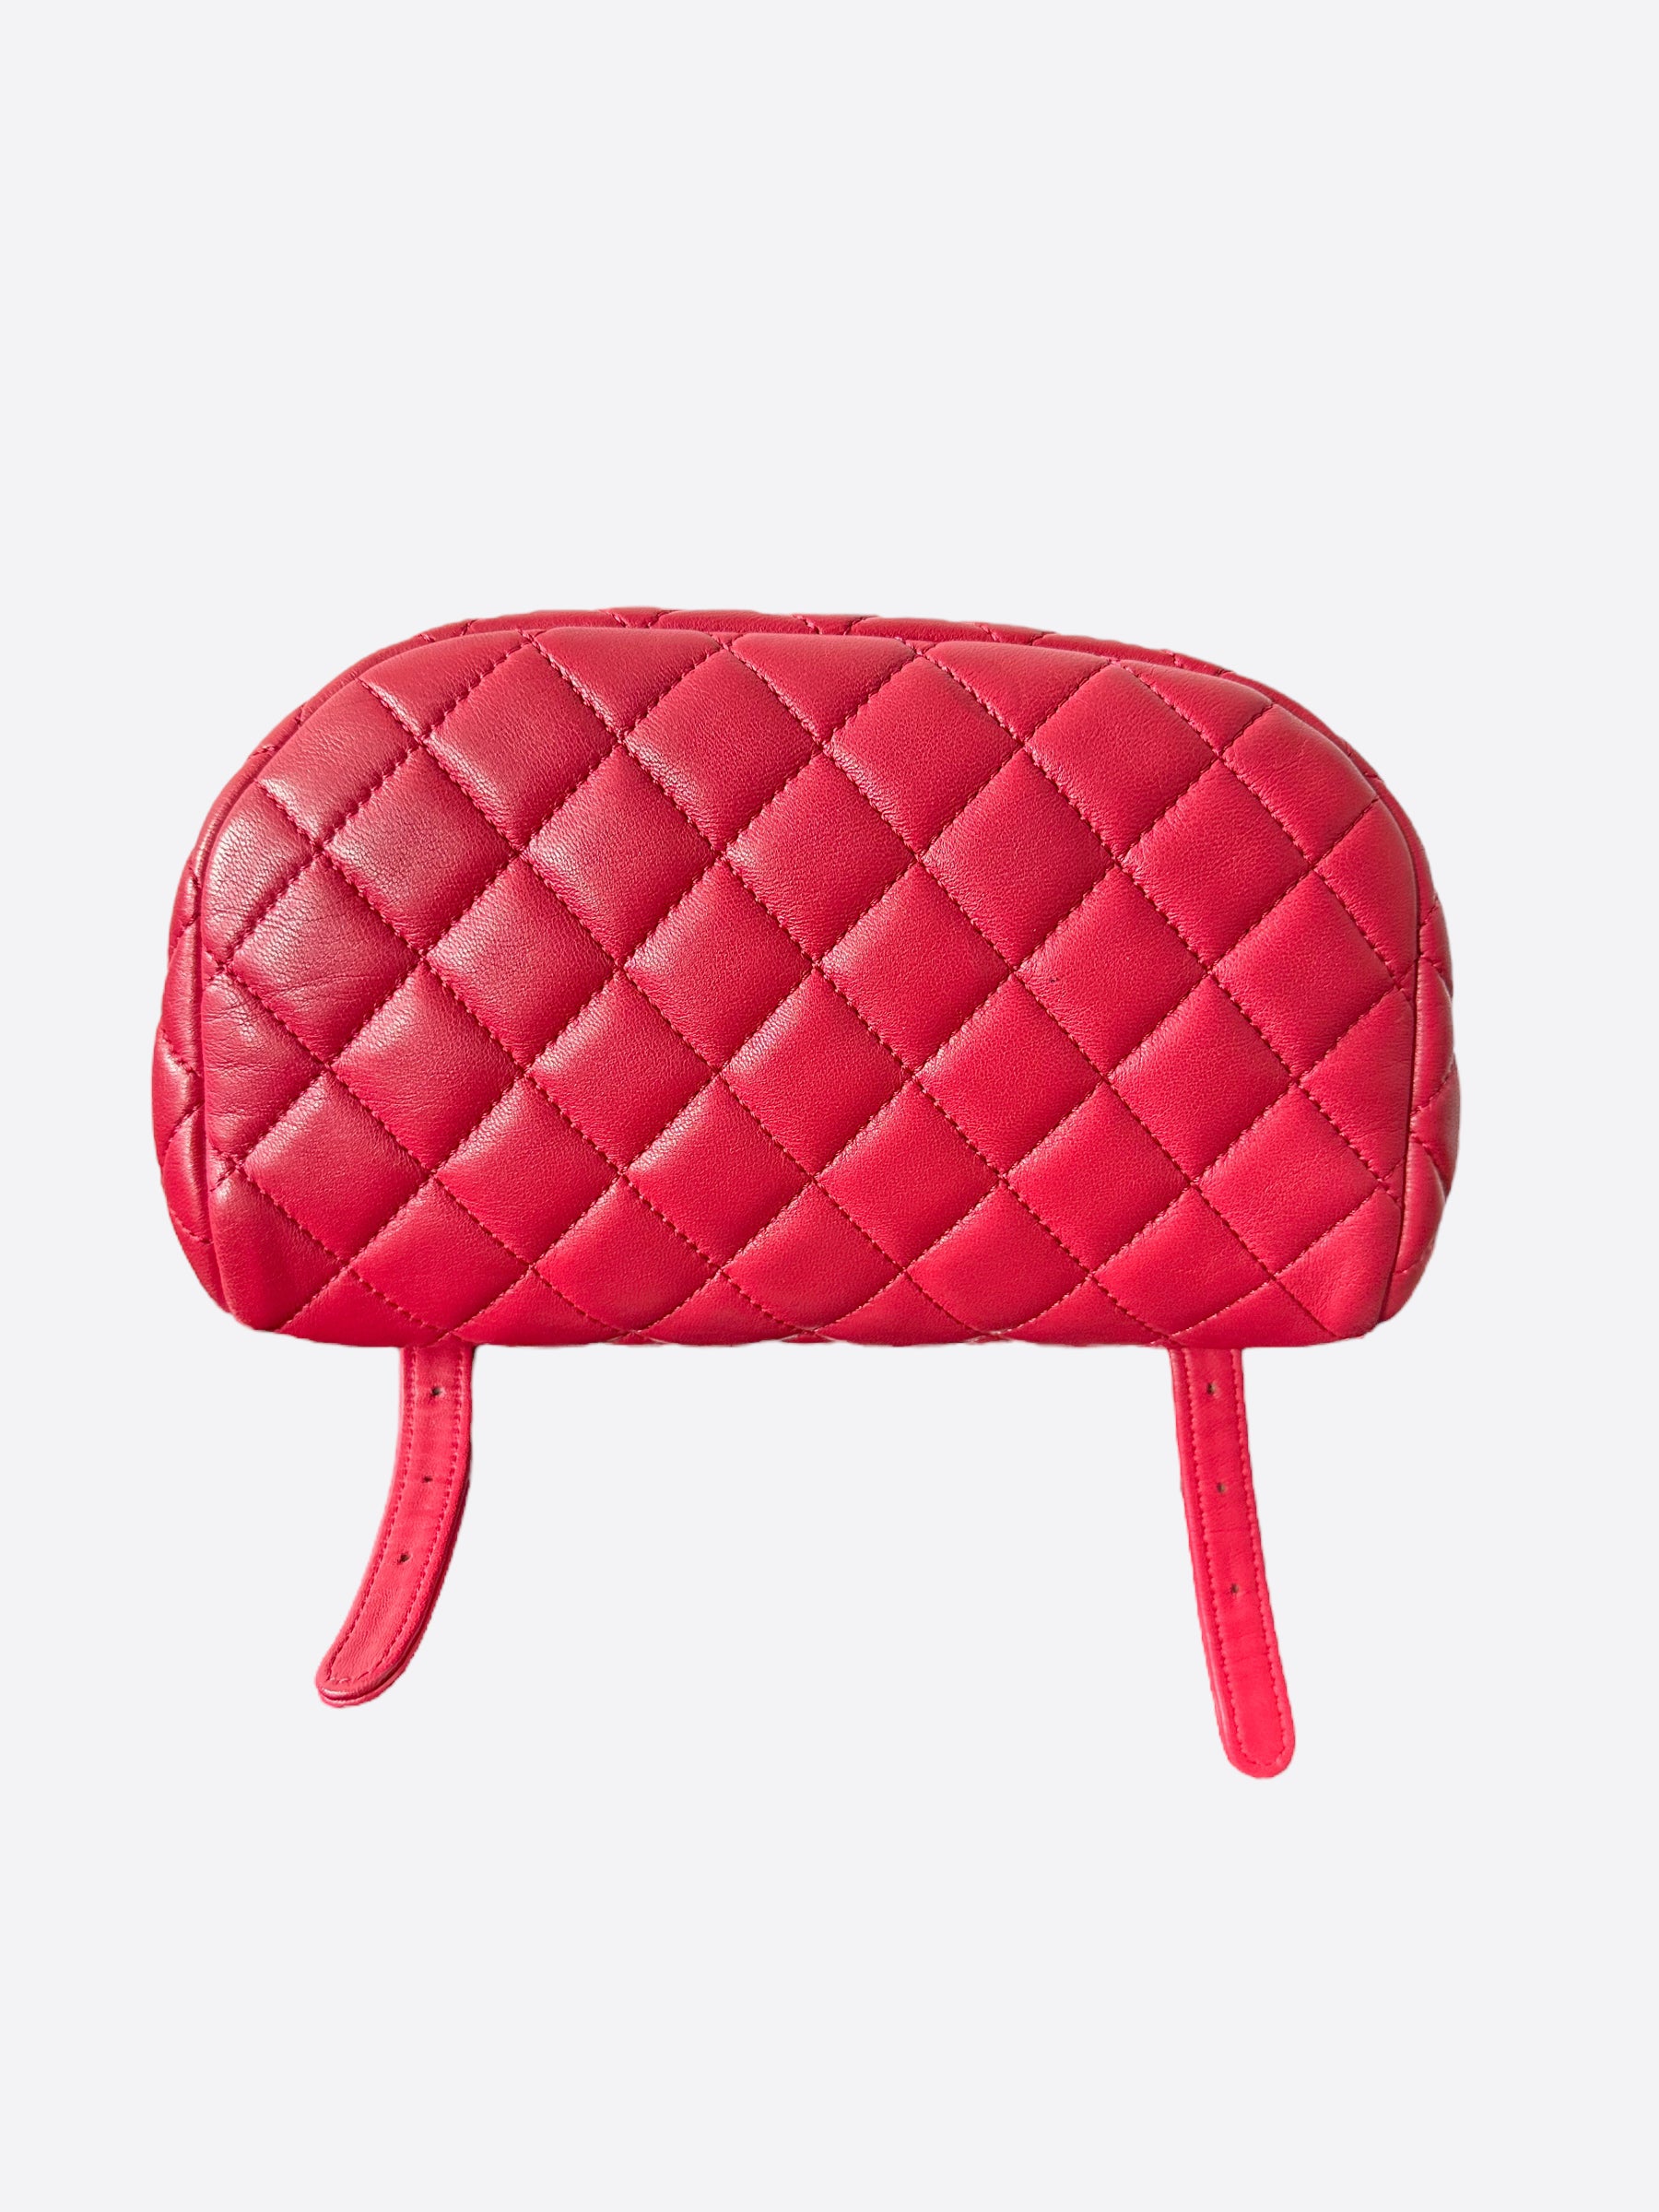 chanel red makeup pouch bag